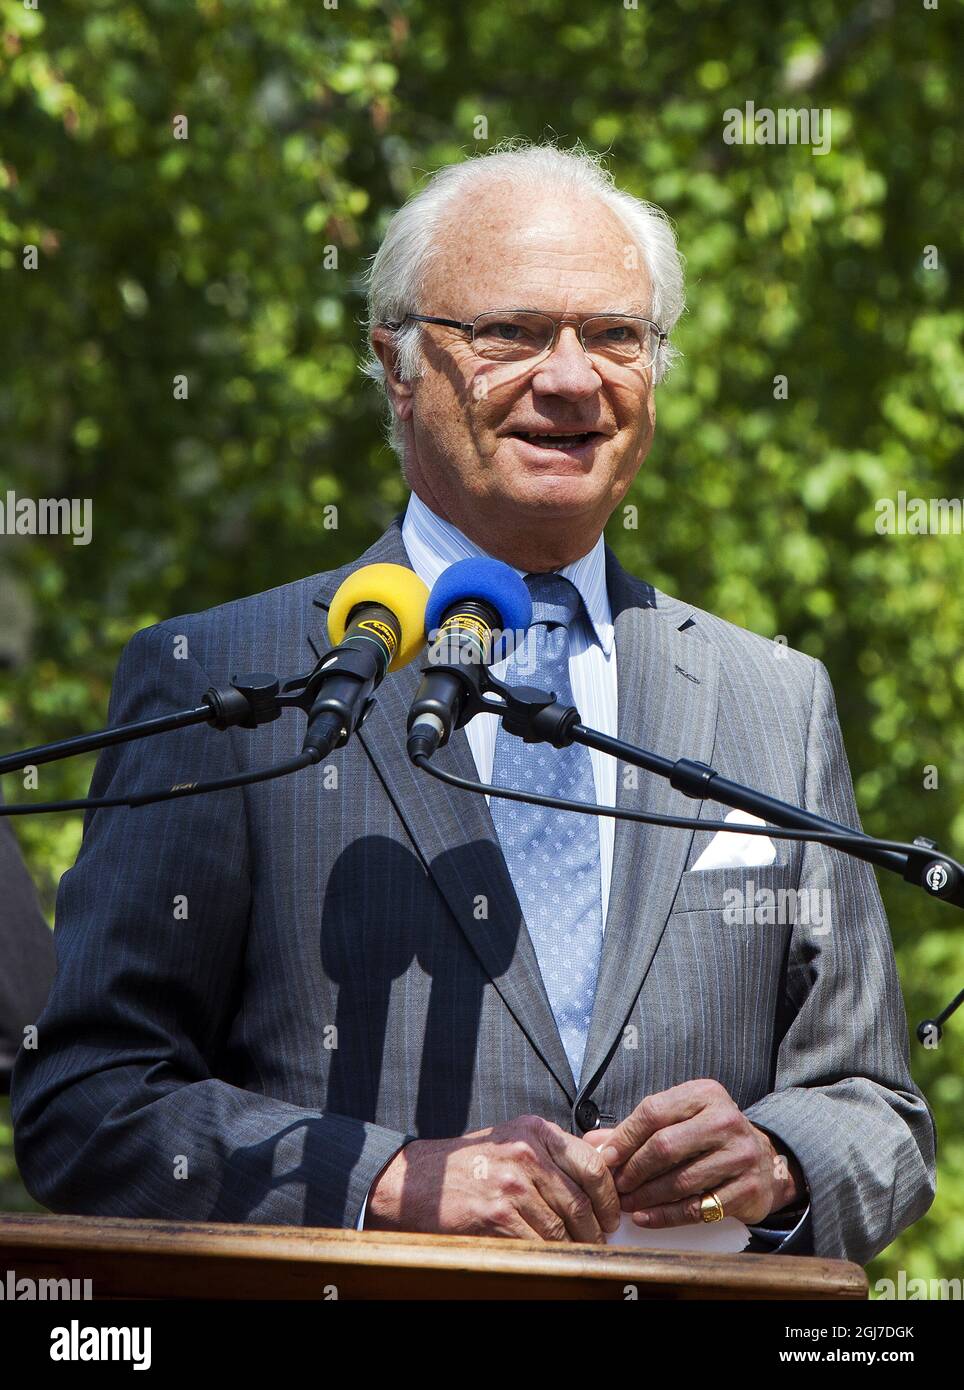 OSTERBYBRUK 2012-06-13 King Carl Gustaf of Sweden is seen during his speech at the inauguration of the Dannemora Mine in Osterbybruk, Sweden 13 jun 2012. Foto: Gunnar Seijbold / XP / SCANPIX / kod 7132 ** OUT SWEDEN OUT ** Stock Photo